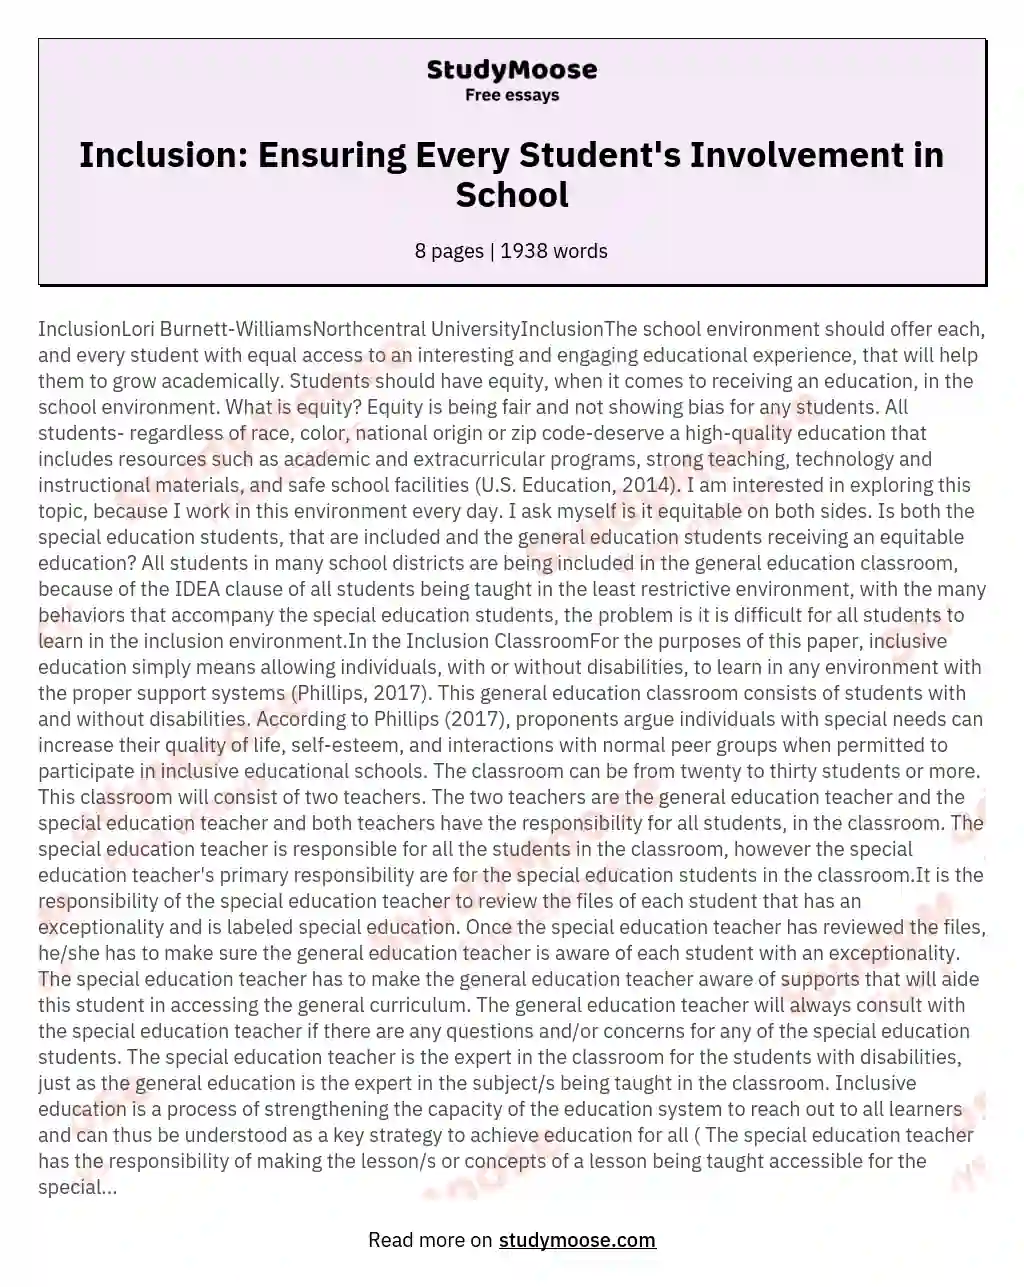 Inclusion: Ensuring Every Student's Involvement in School